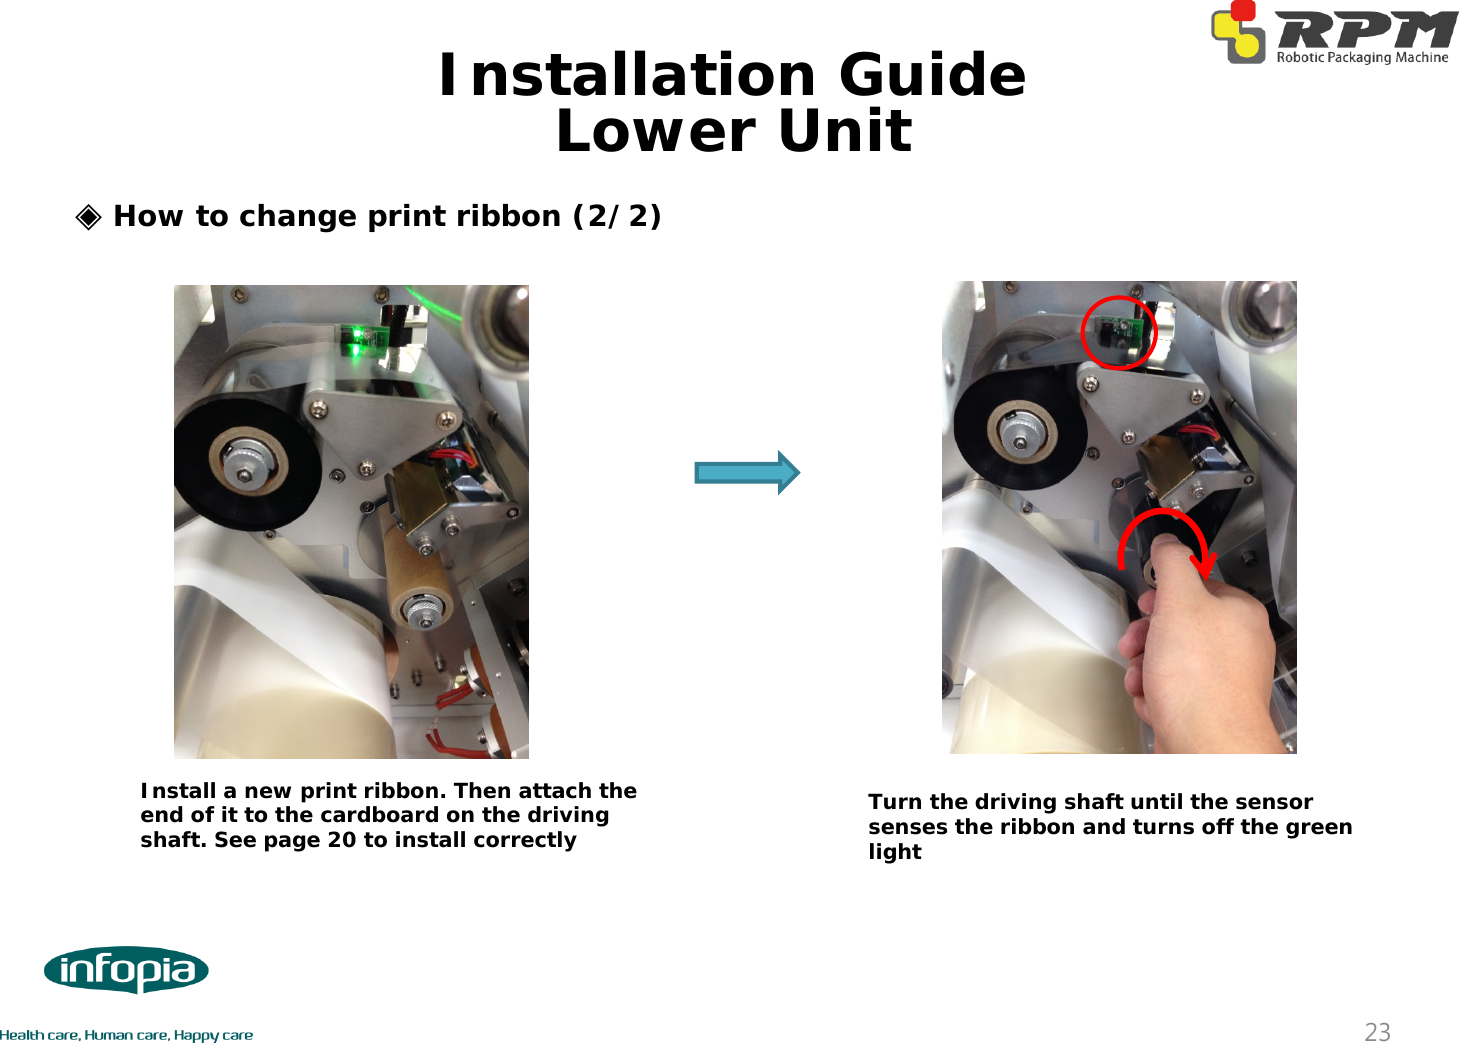 ◈How to change print ribbon (2/2)Install a new print ribbon. Then attach the end of it to the cardboard on the driving shaft. See page 20 to install correctlyTurn the driving shaft until the sensor senses the ribbon and turns off the green light23Lower UnitInstallation Guide